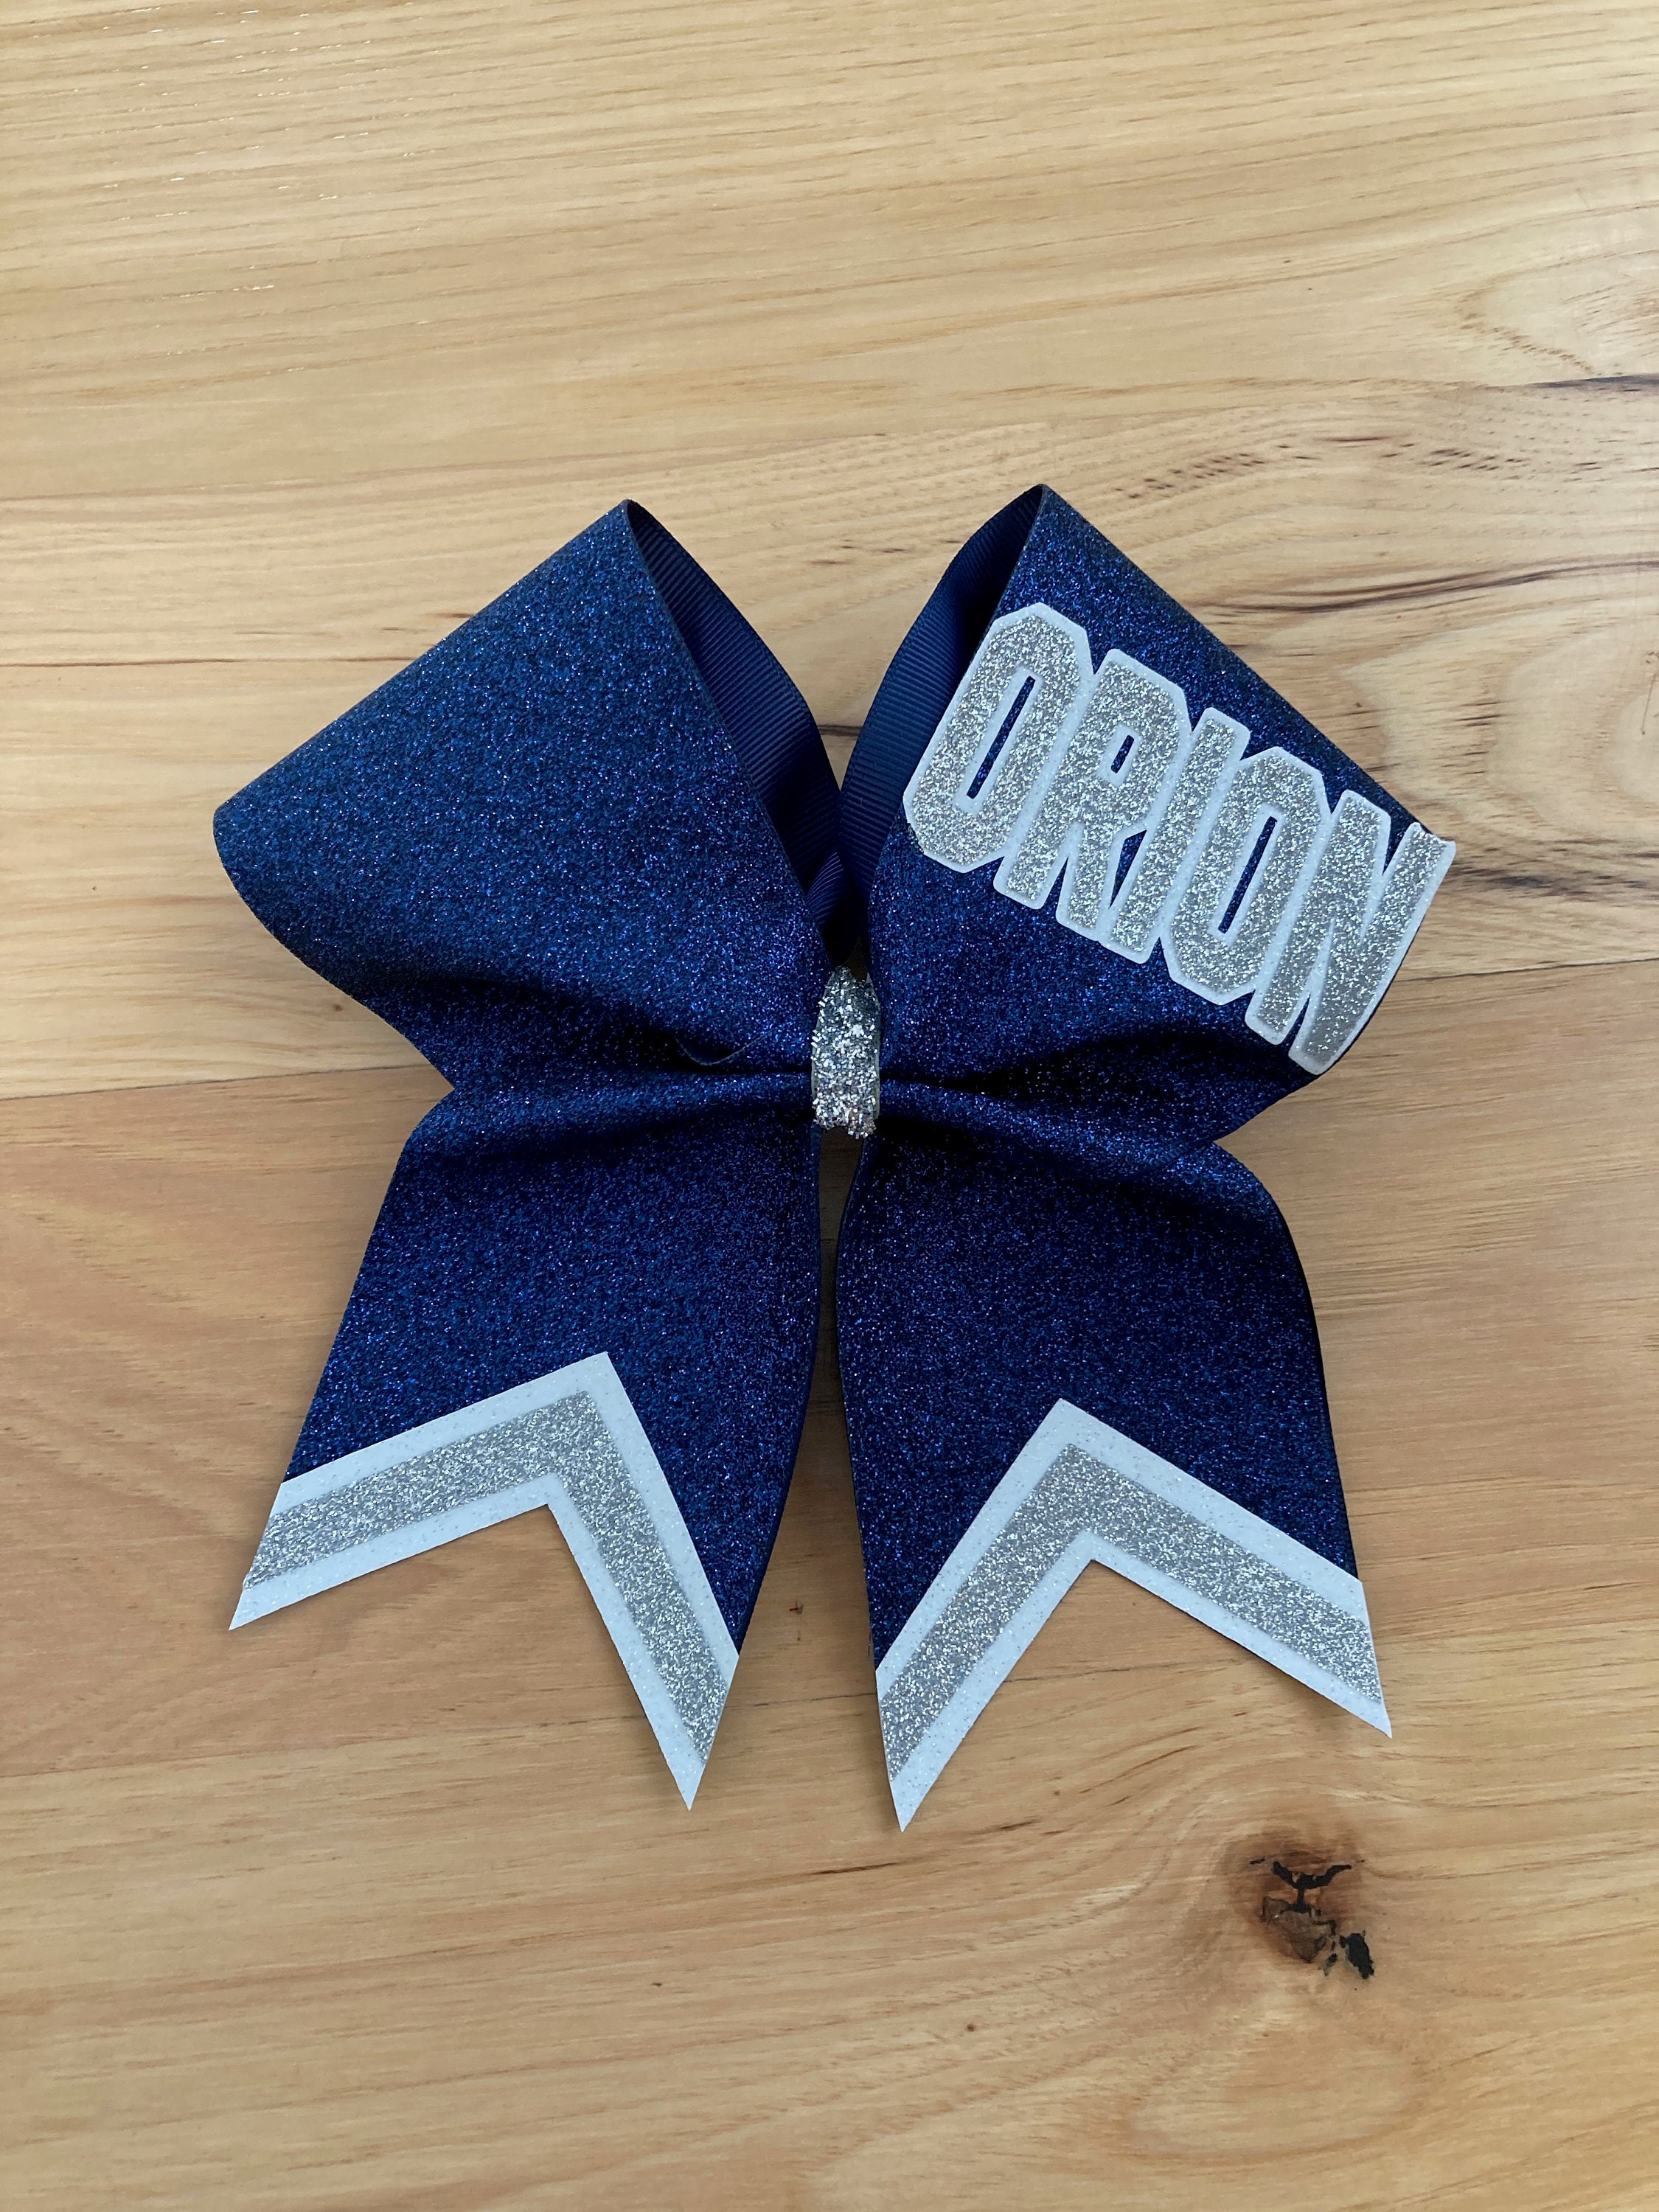 Custom Cheer Bows Made in Your Team Colors. Price Listed is per